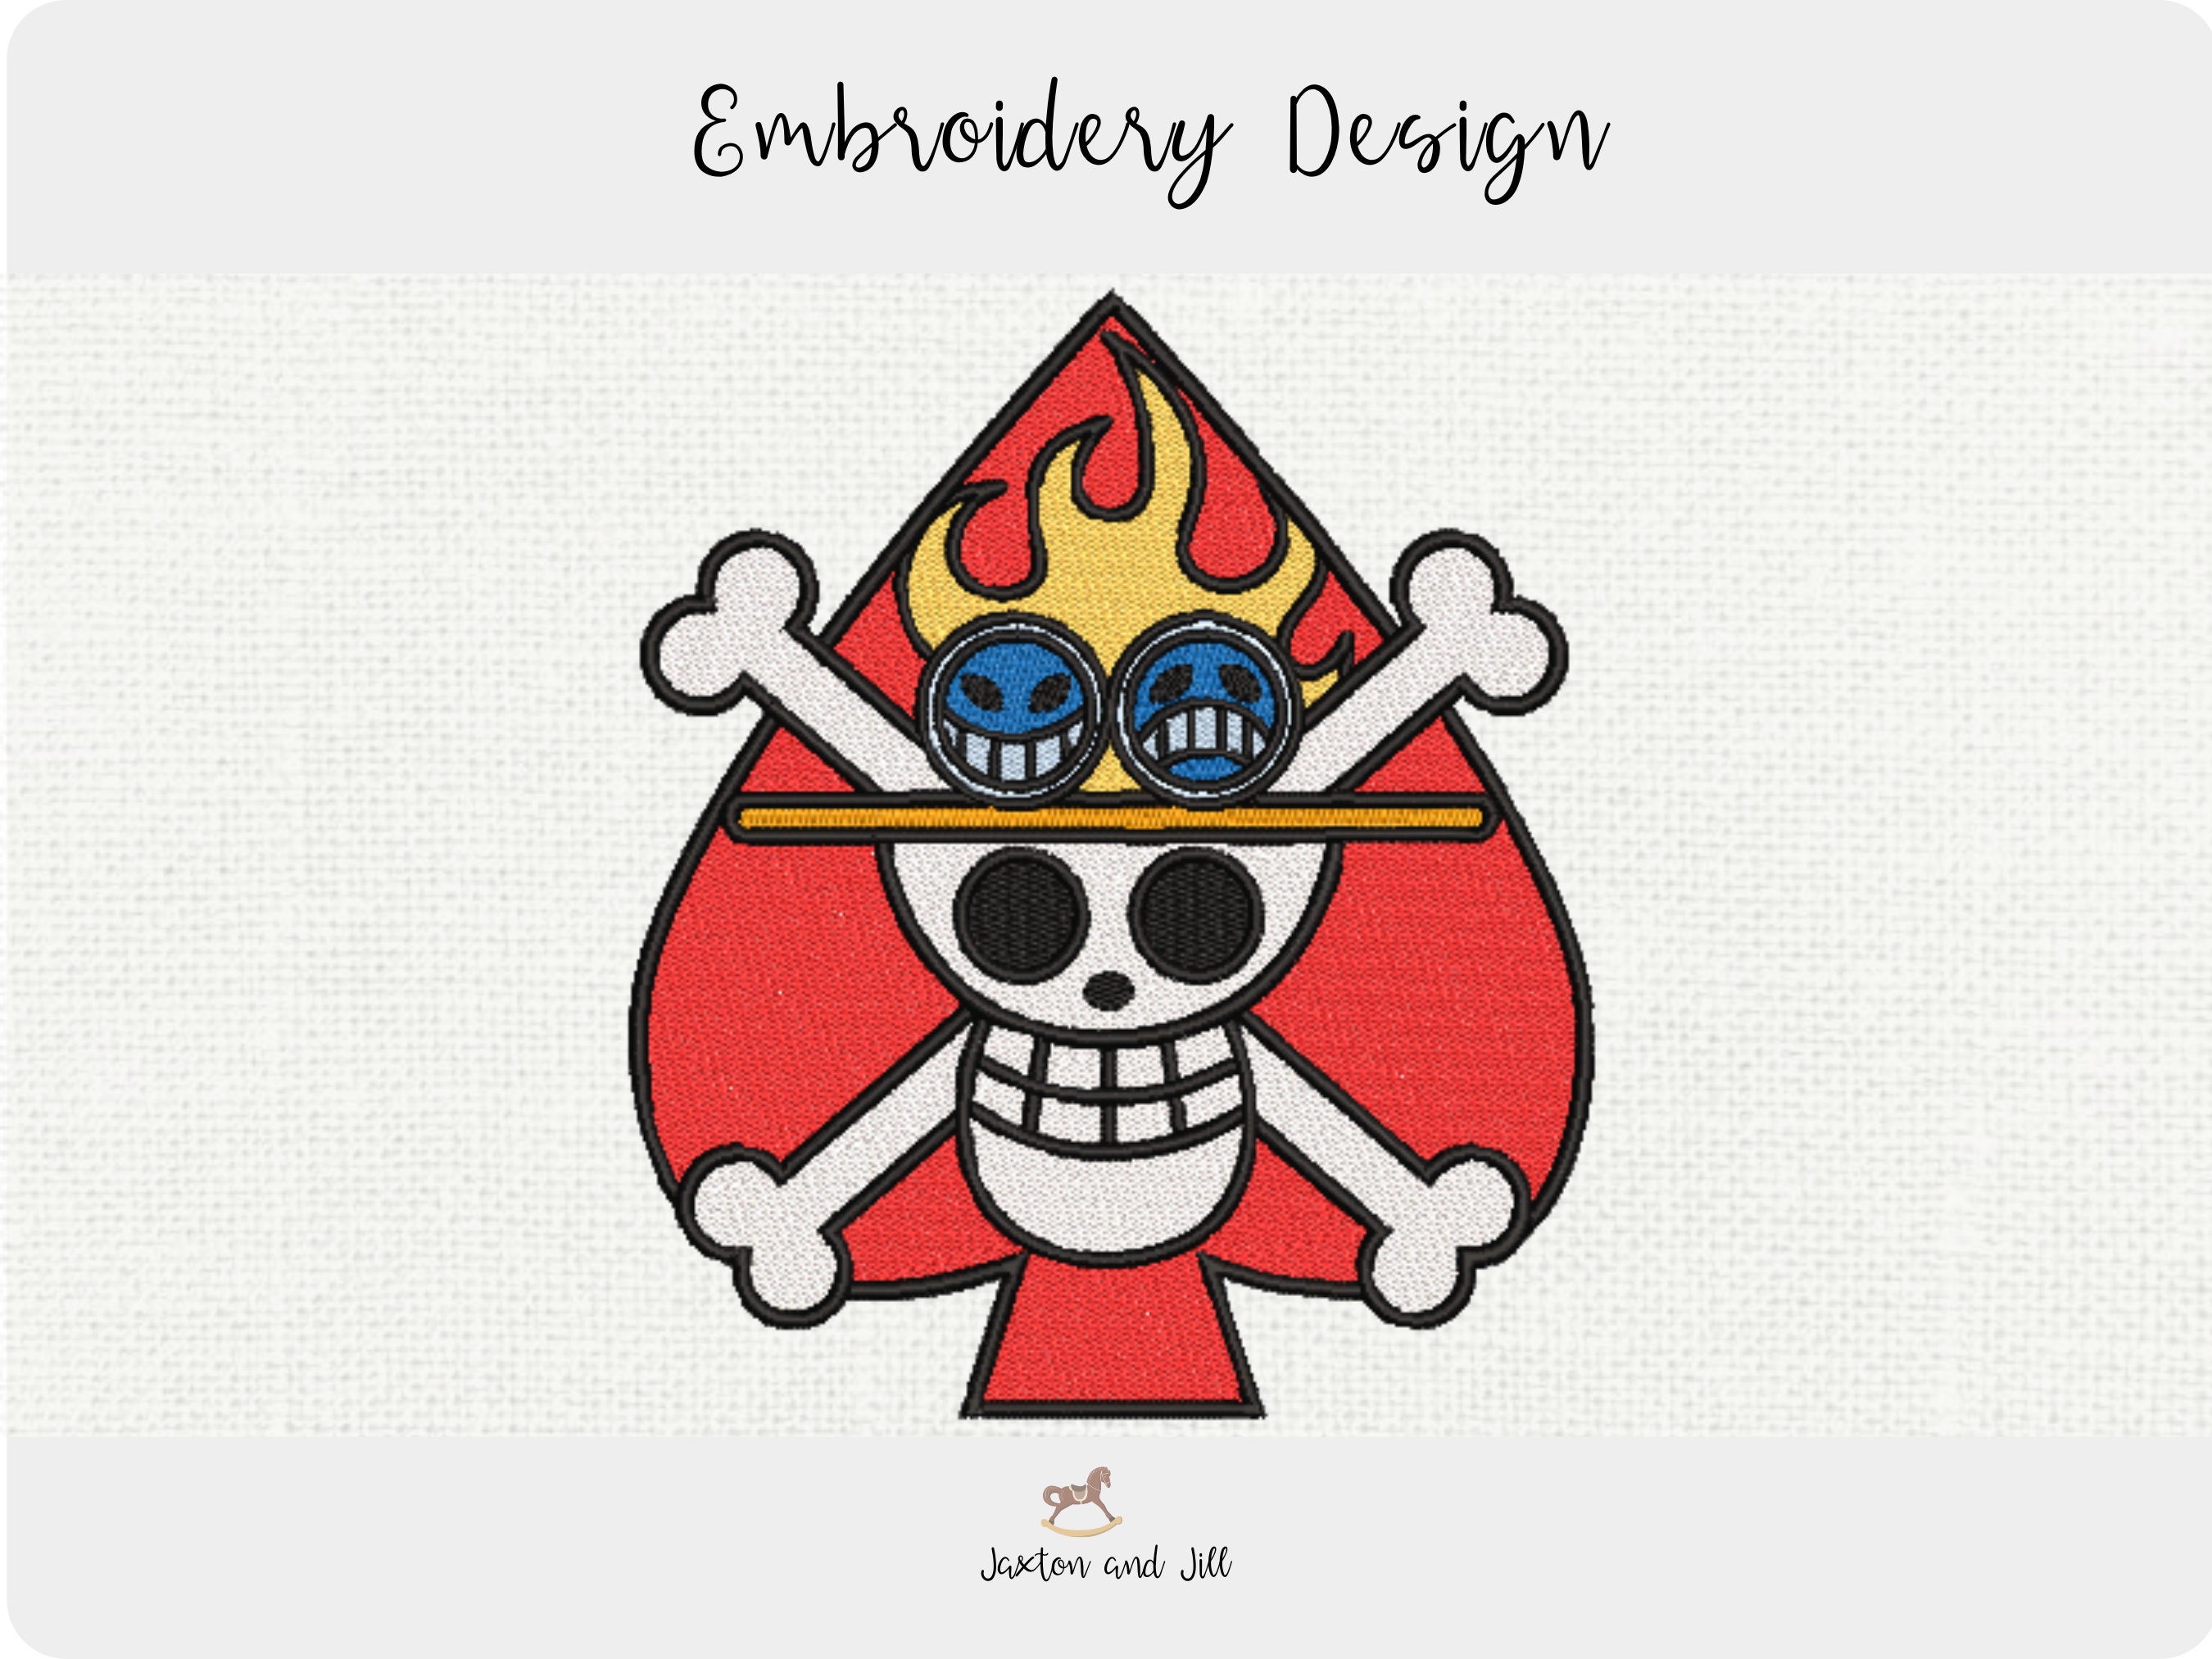 Anime Embroidery Pattern One Piece Merry Ship - A.G.E Store